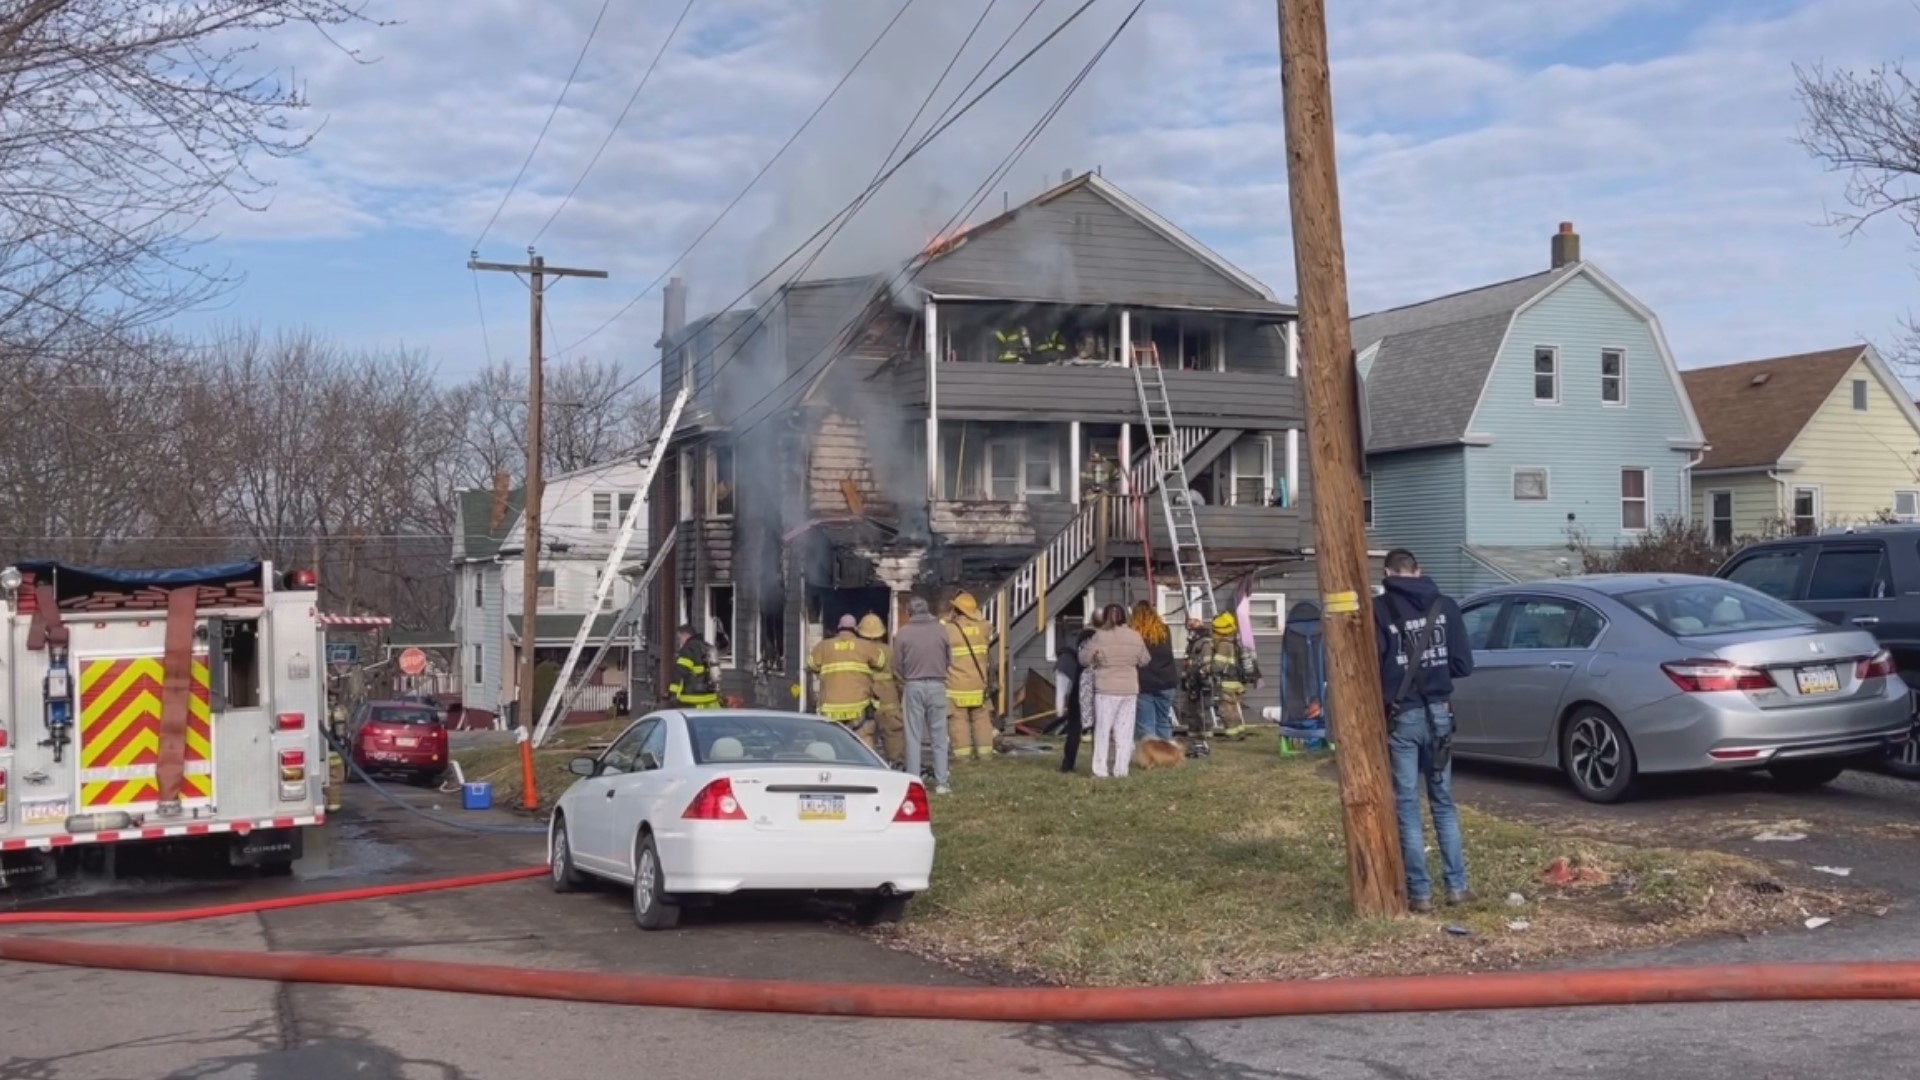 A fire damaged an apartment building Monday morning in Wilkes-Barre, displacing 11 people.